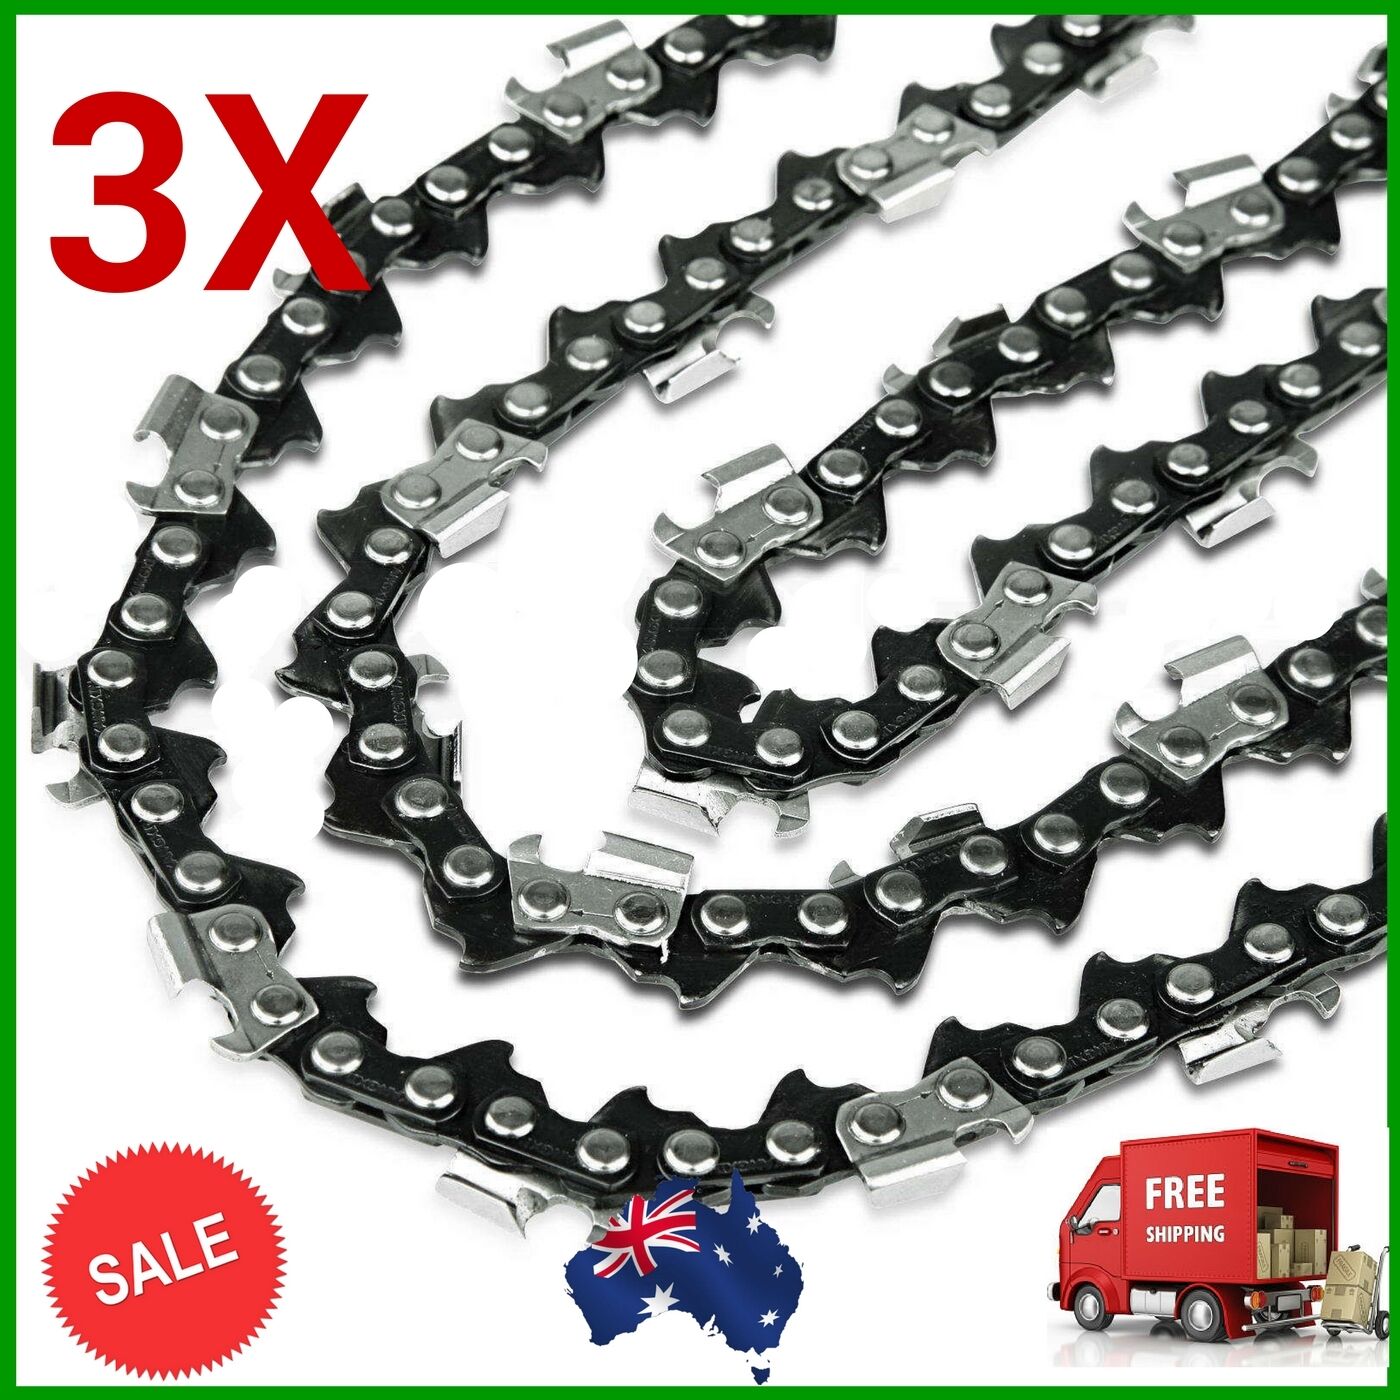 12" BAR & 3 CHAINS COMBO FOR HOMELITE PETROL CHAINSAW HBCS3530